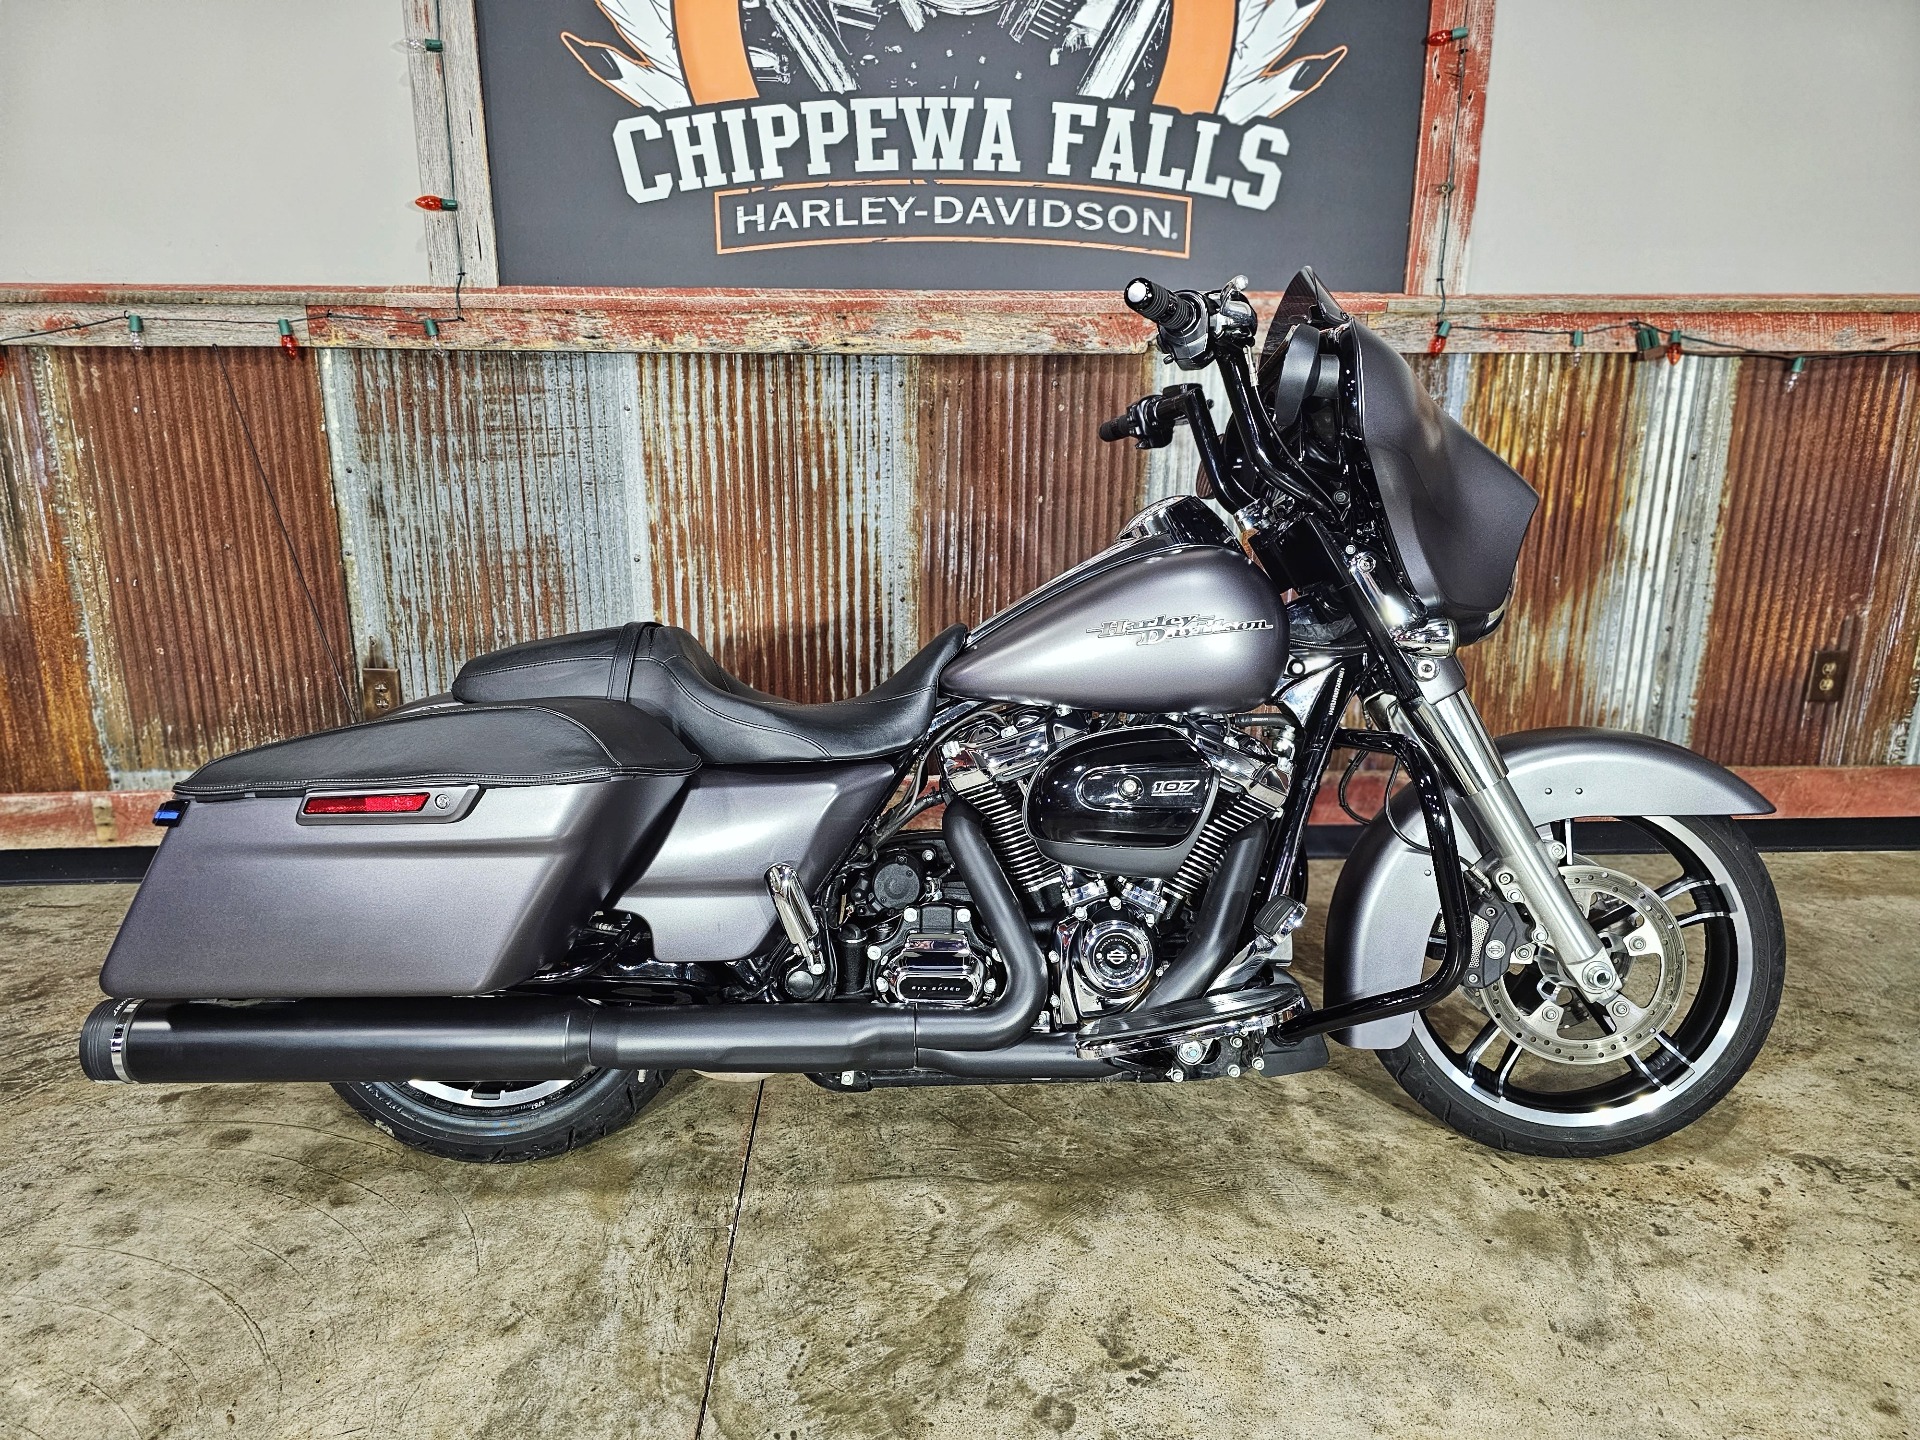 2017 Harley-Davidson Street Glide® Special in Chippewa Falls, Wisconsin - Photo 1